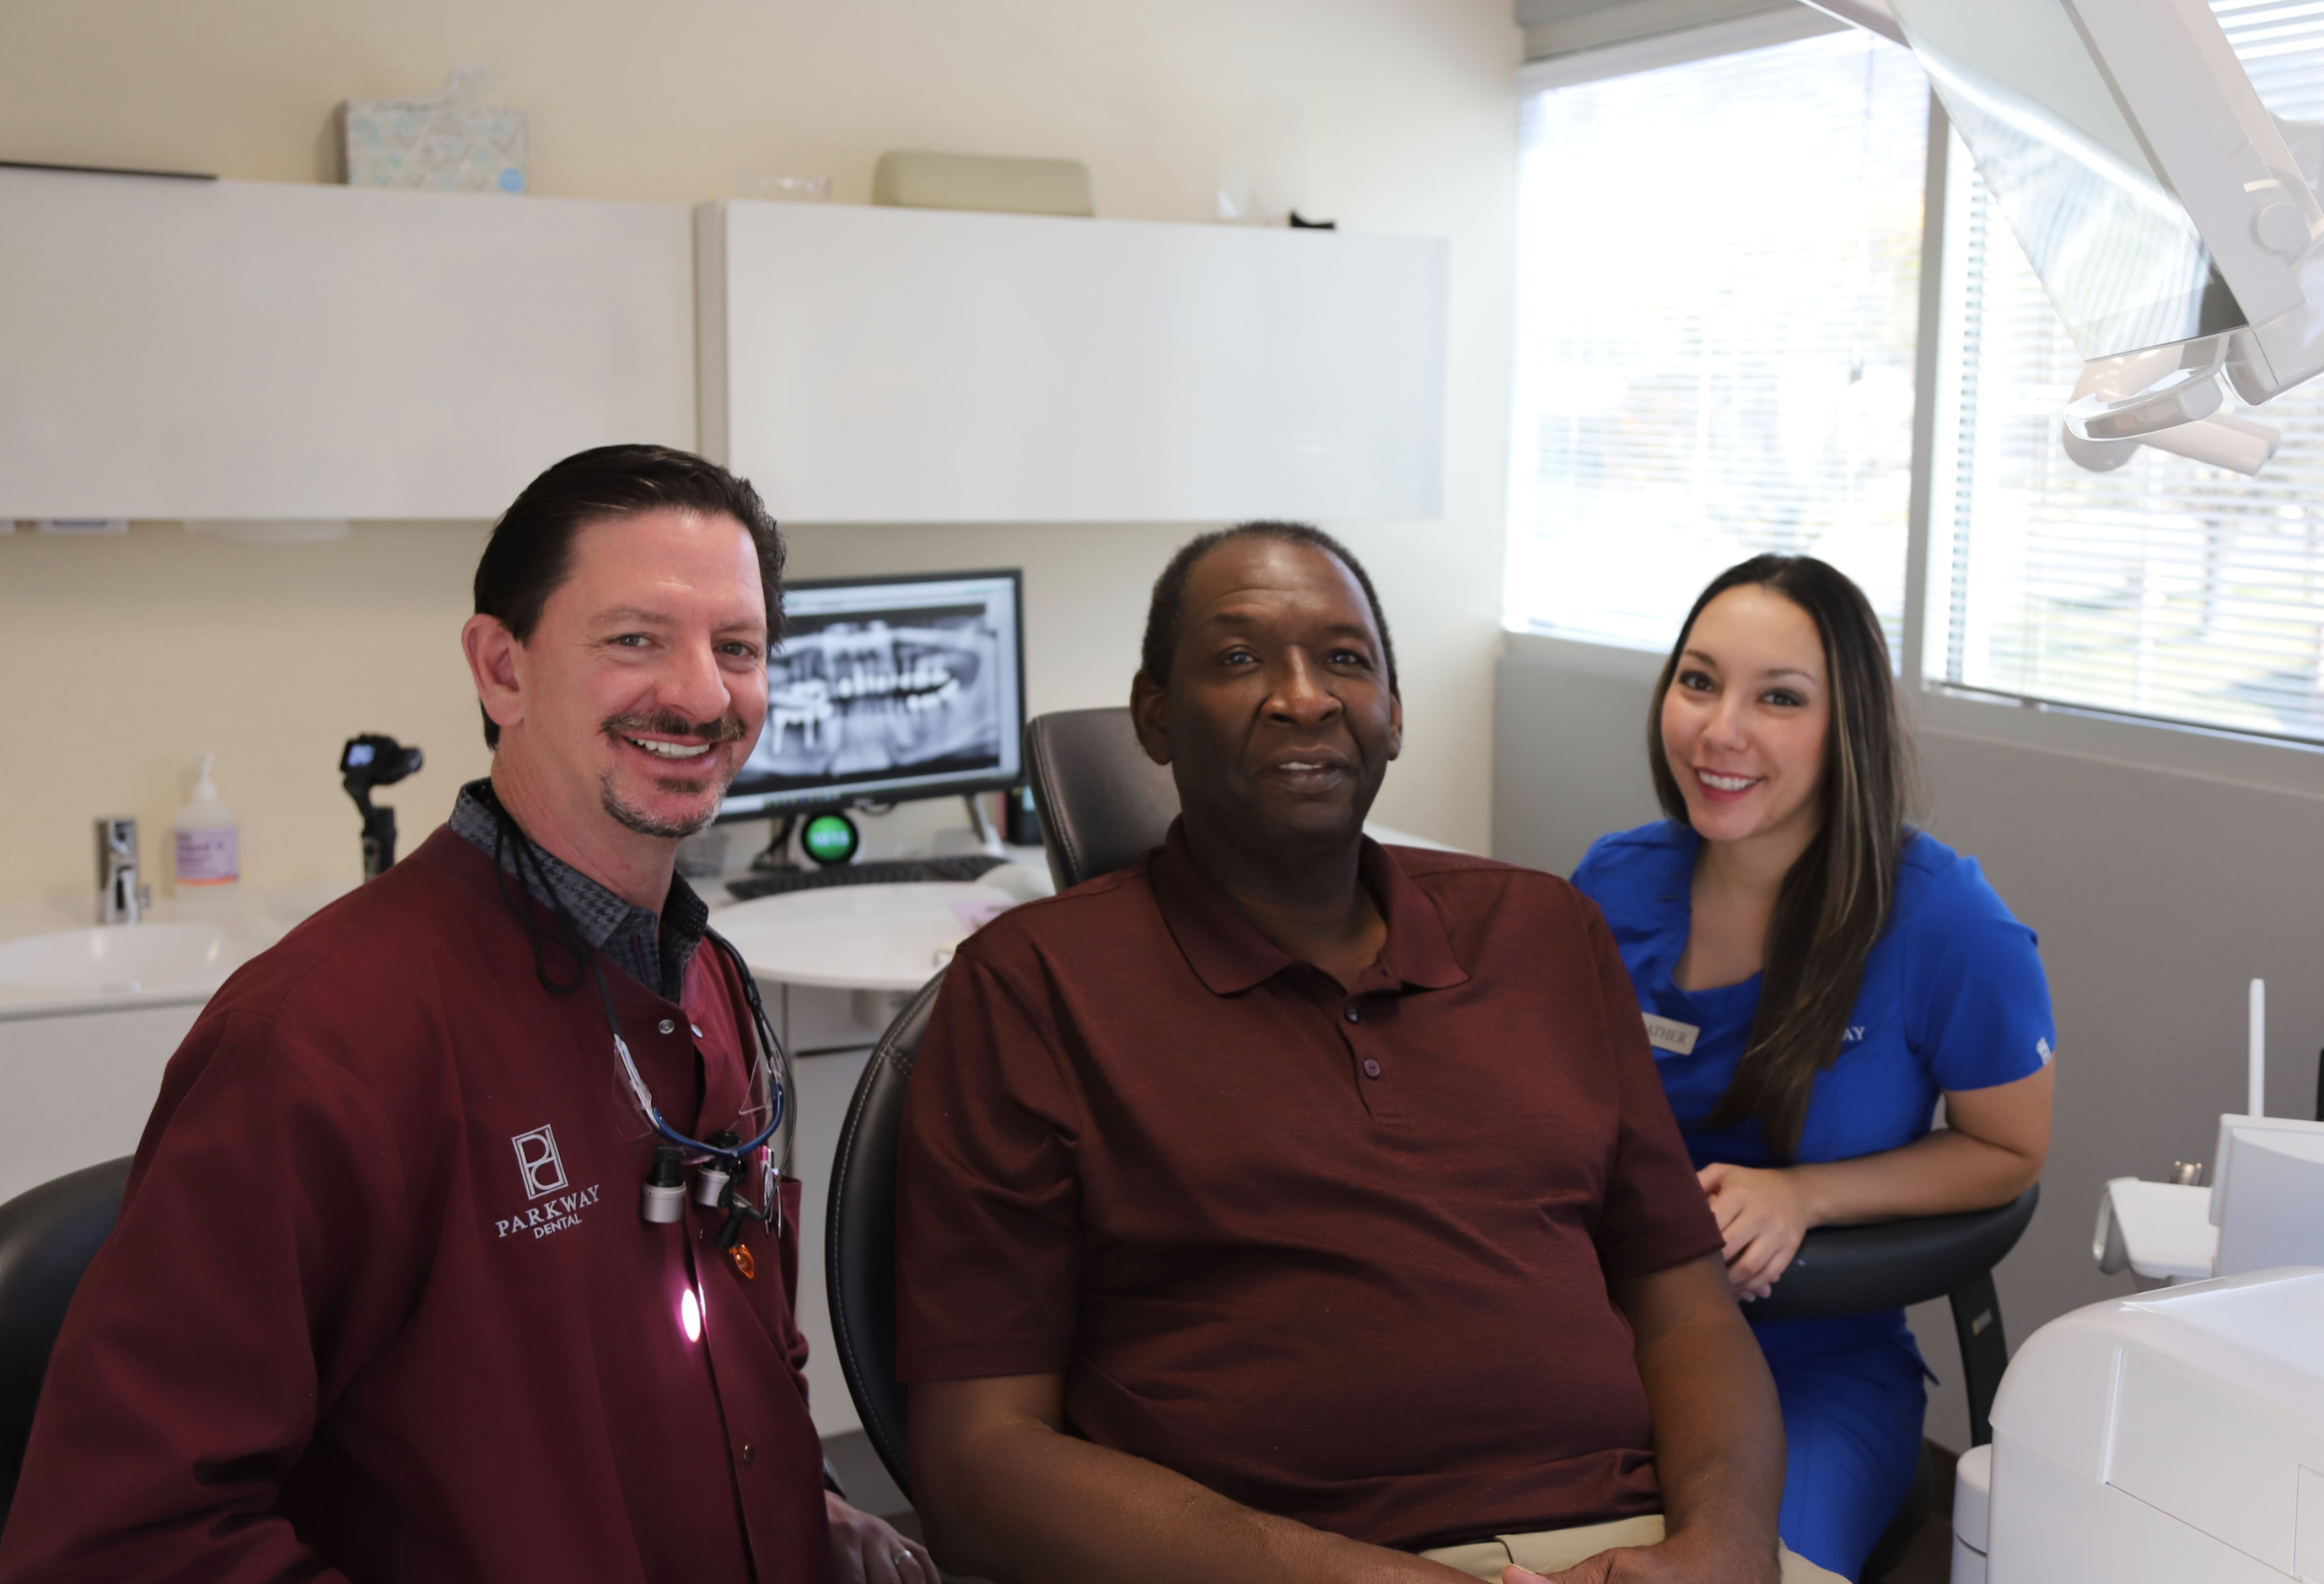 Staff of Parkway Dental: Michael D Haight, DDS | Albuquerque, NM